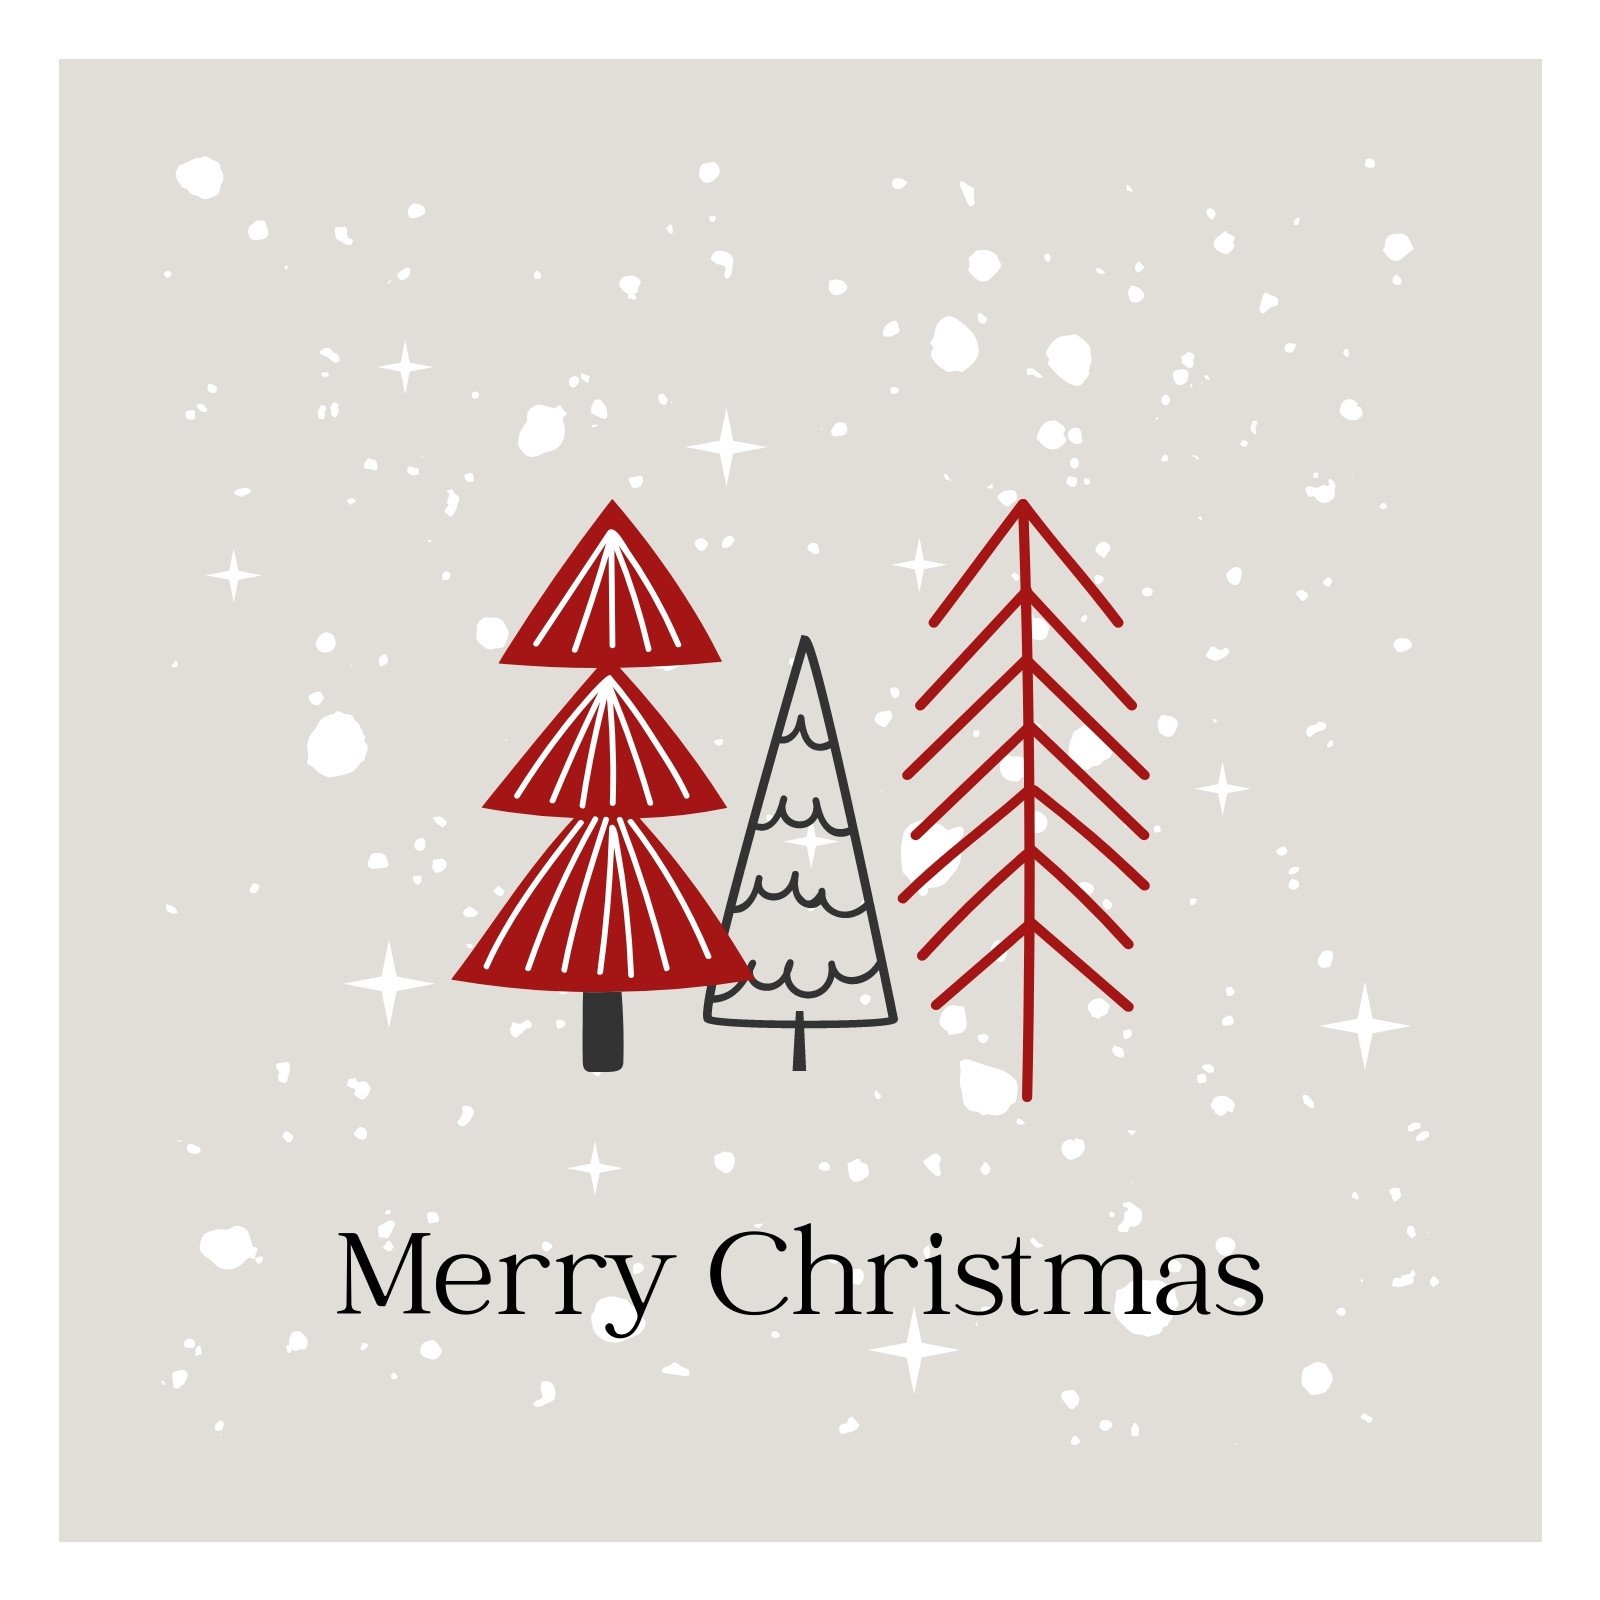 merry christmas greetings cards